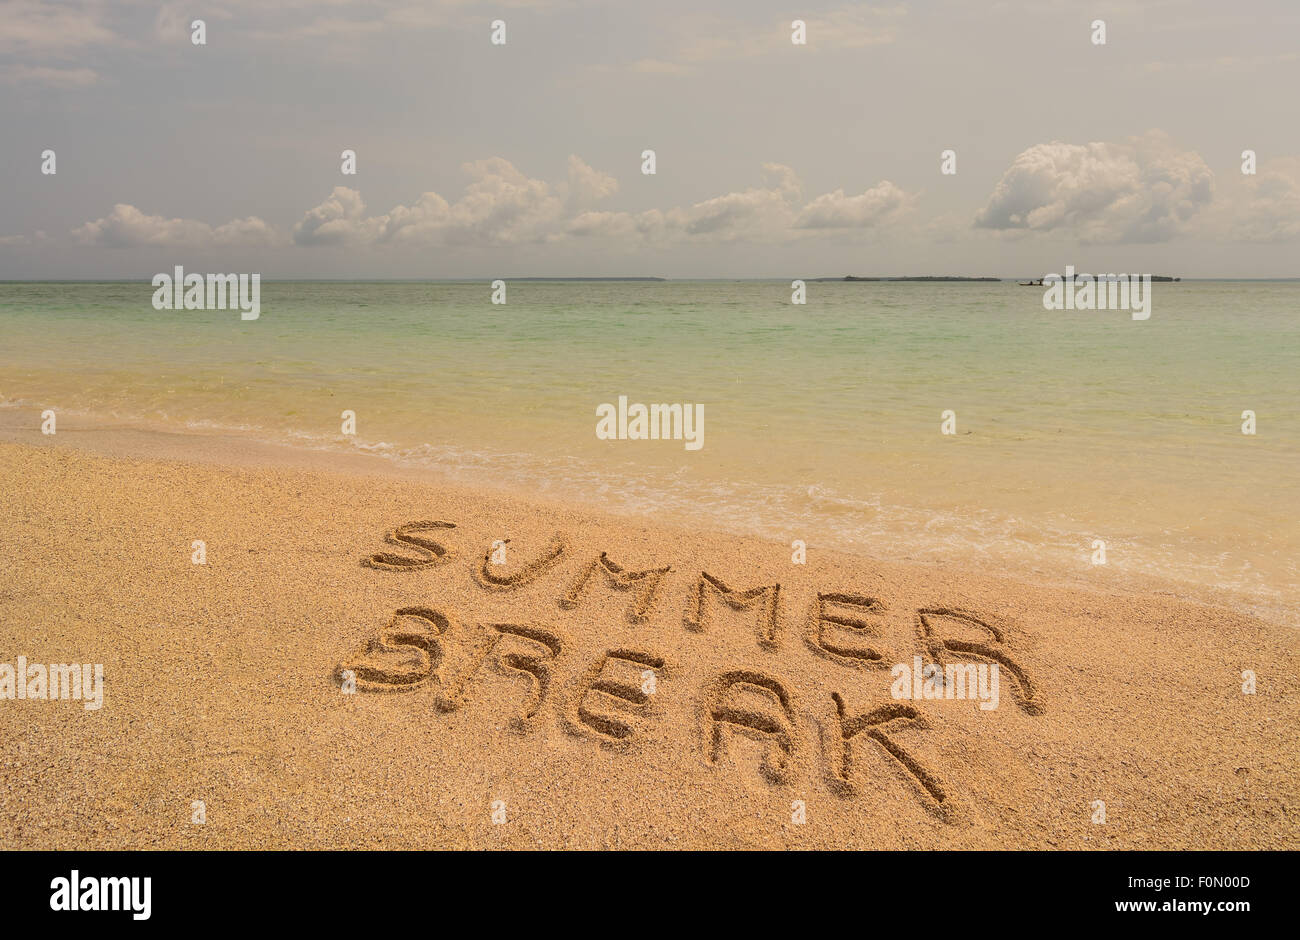 In the photo a beach in Zanzibar in the afternoon where there is an inscription on the sand 'Summer Break'. Stock Photo